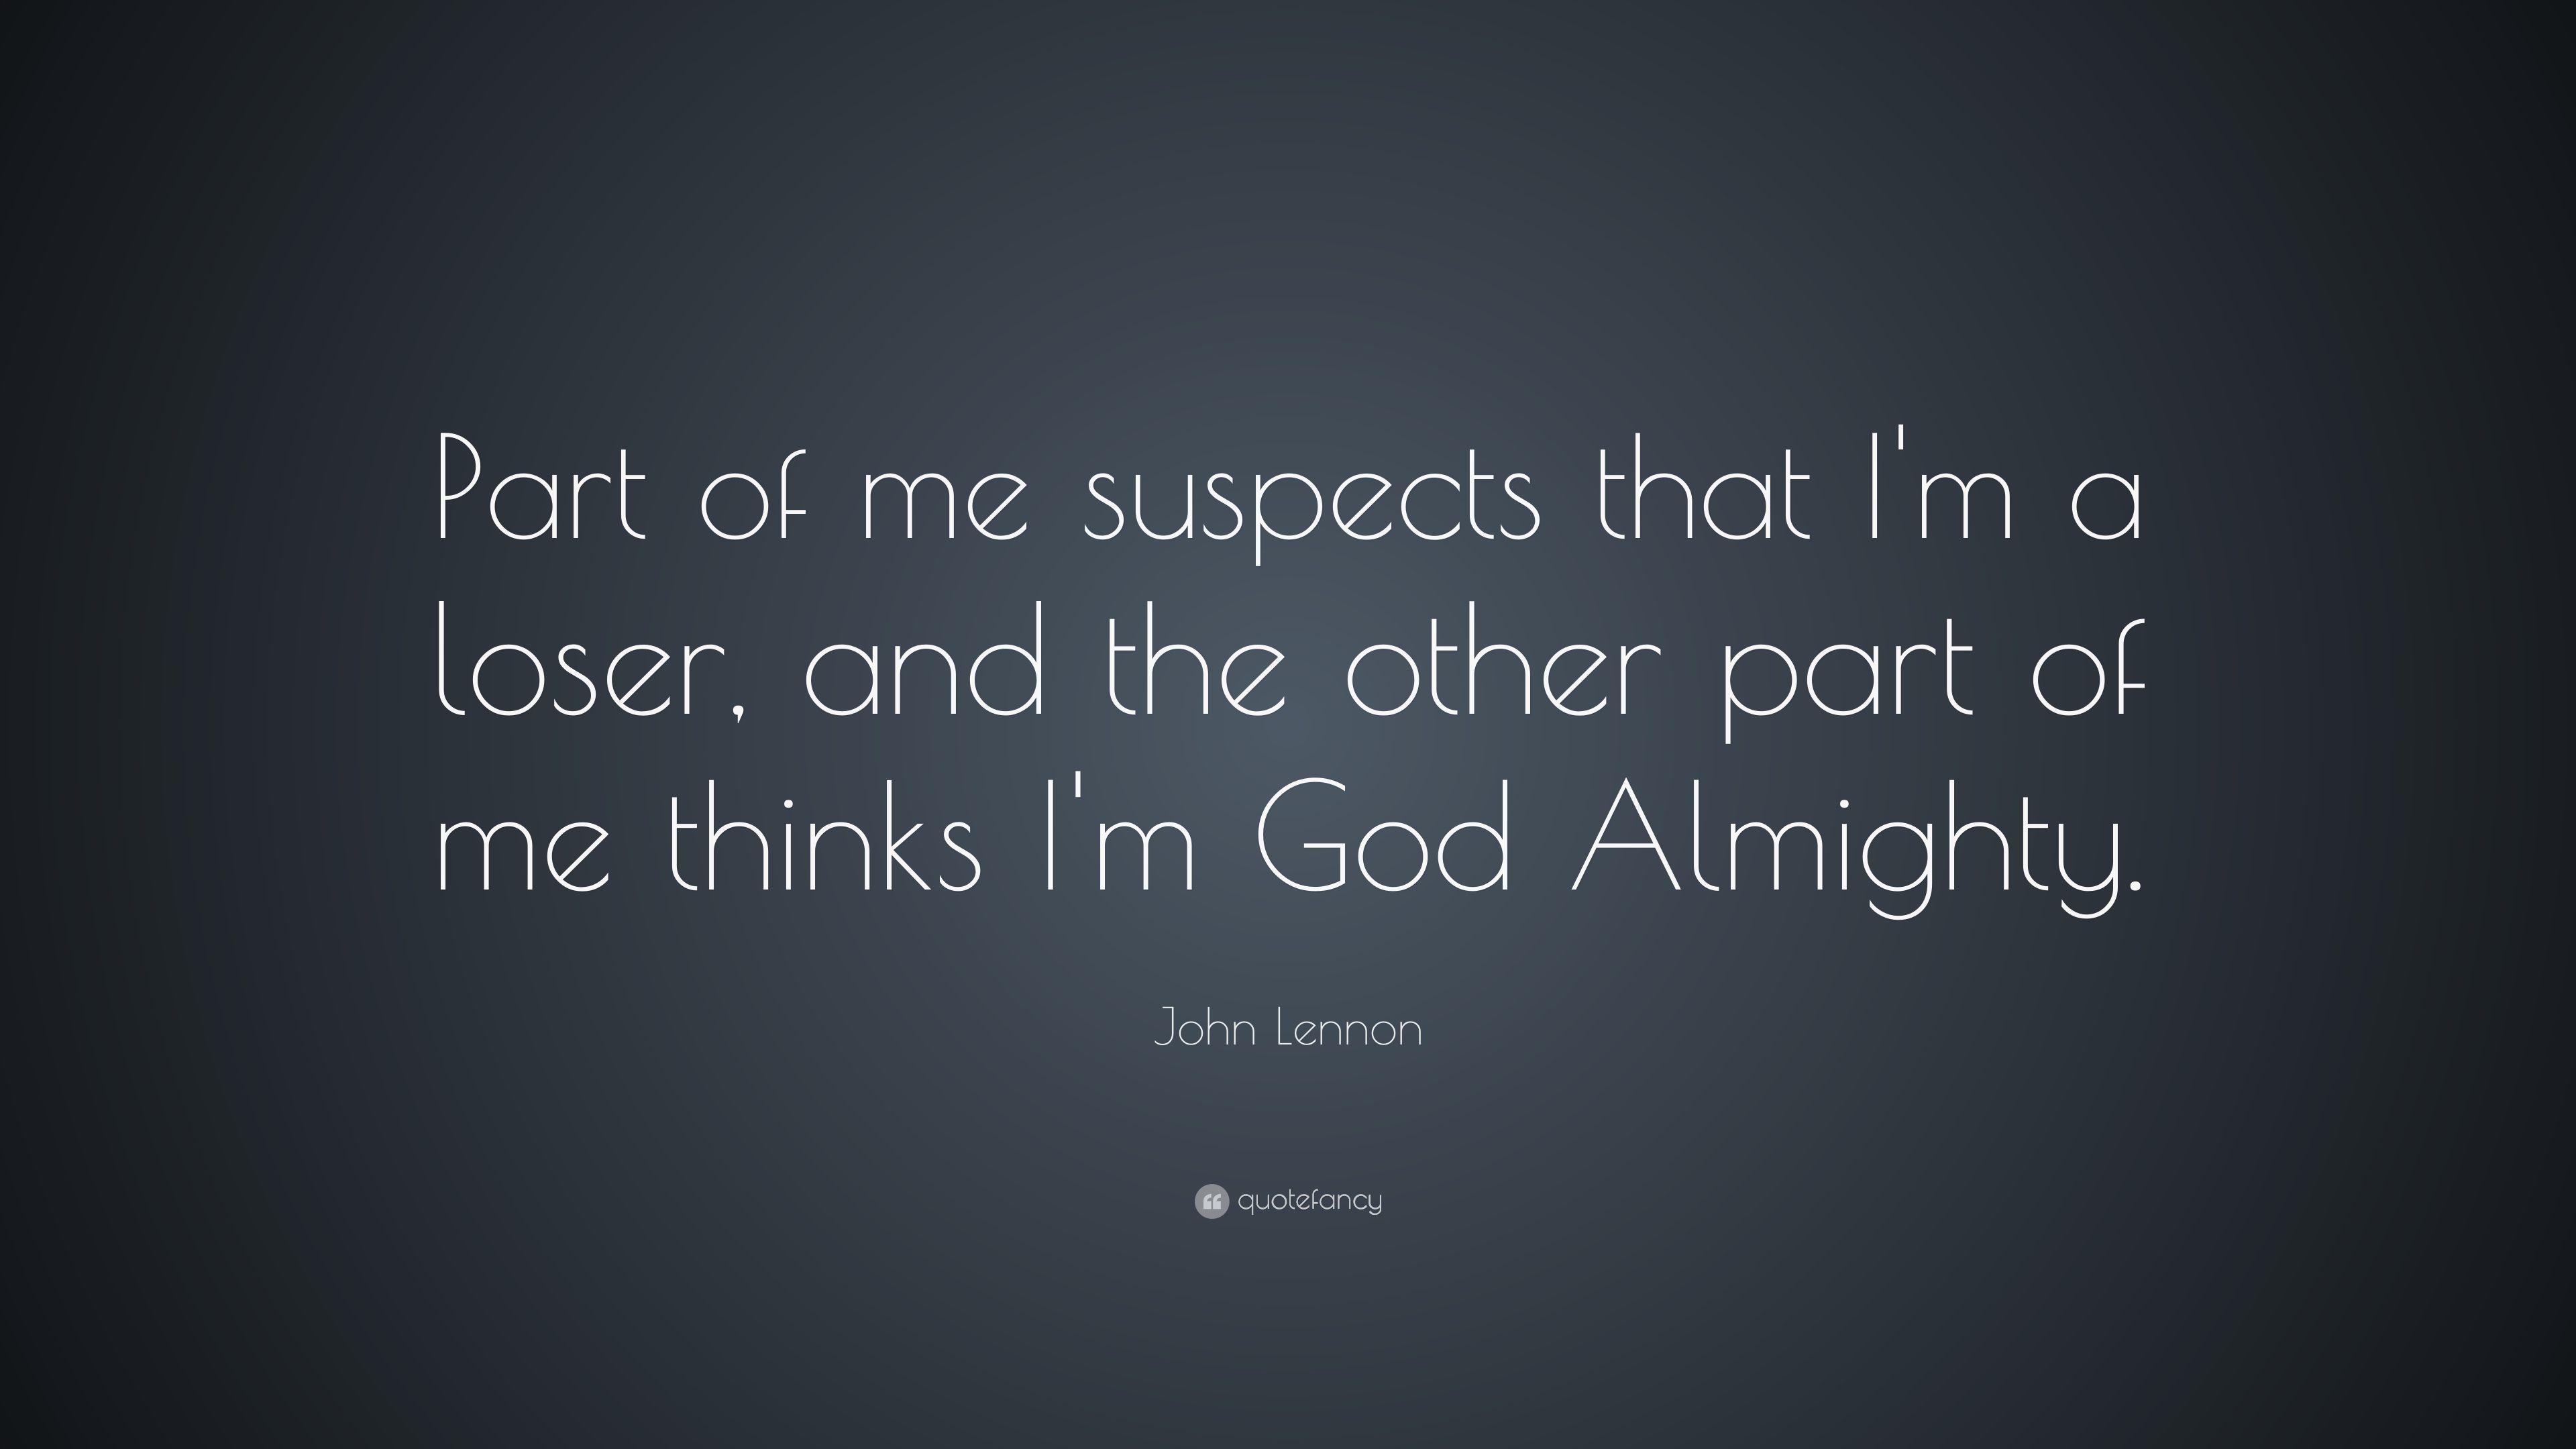 John Lennon Quote: “Part of me suspects that I'm a loser, and